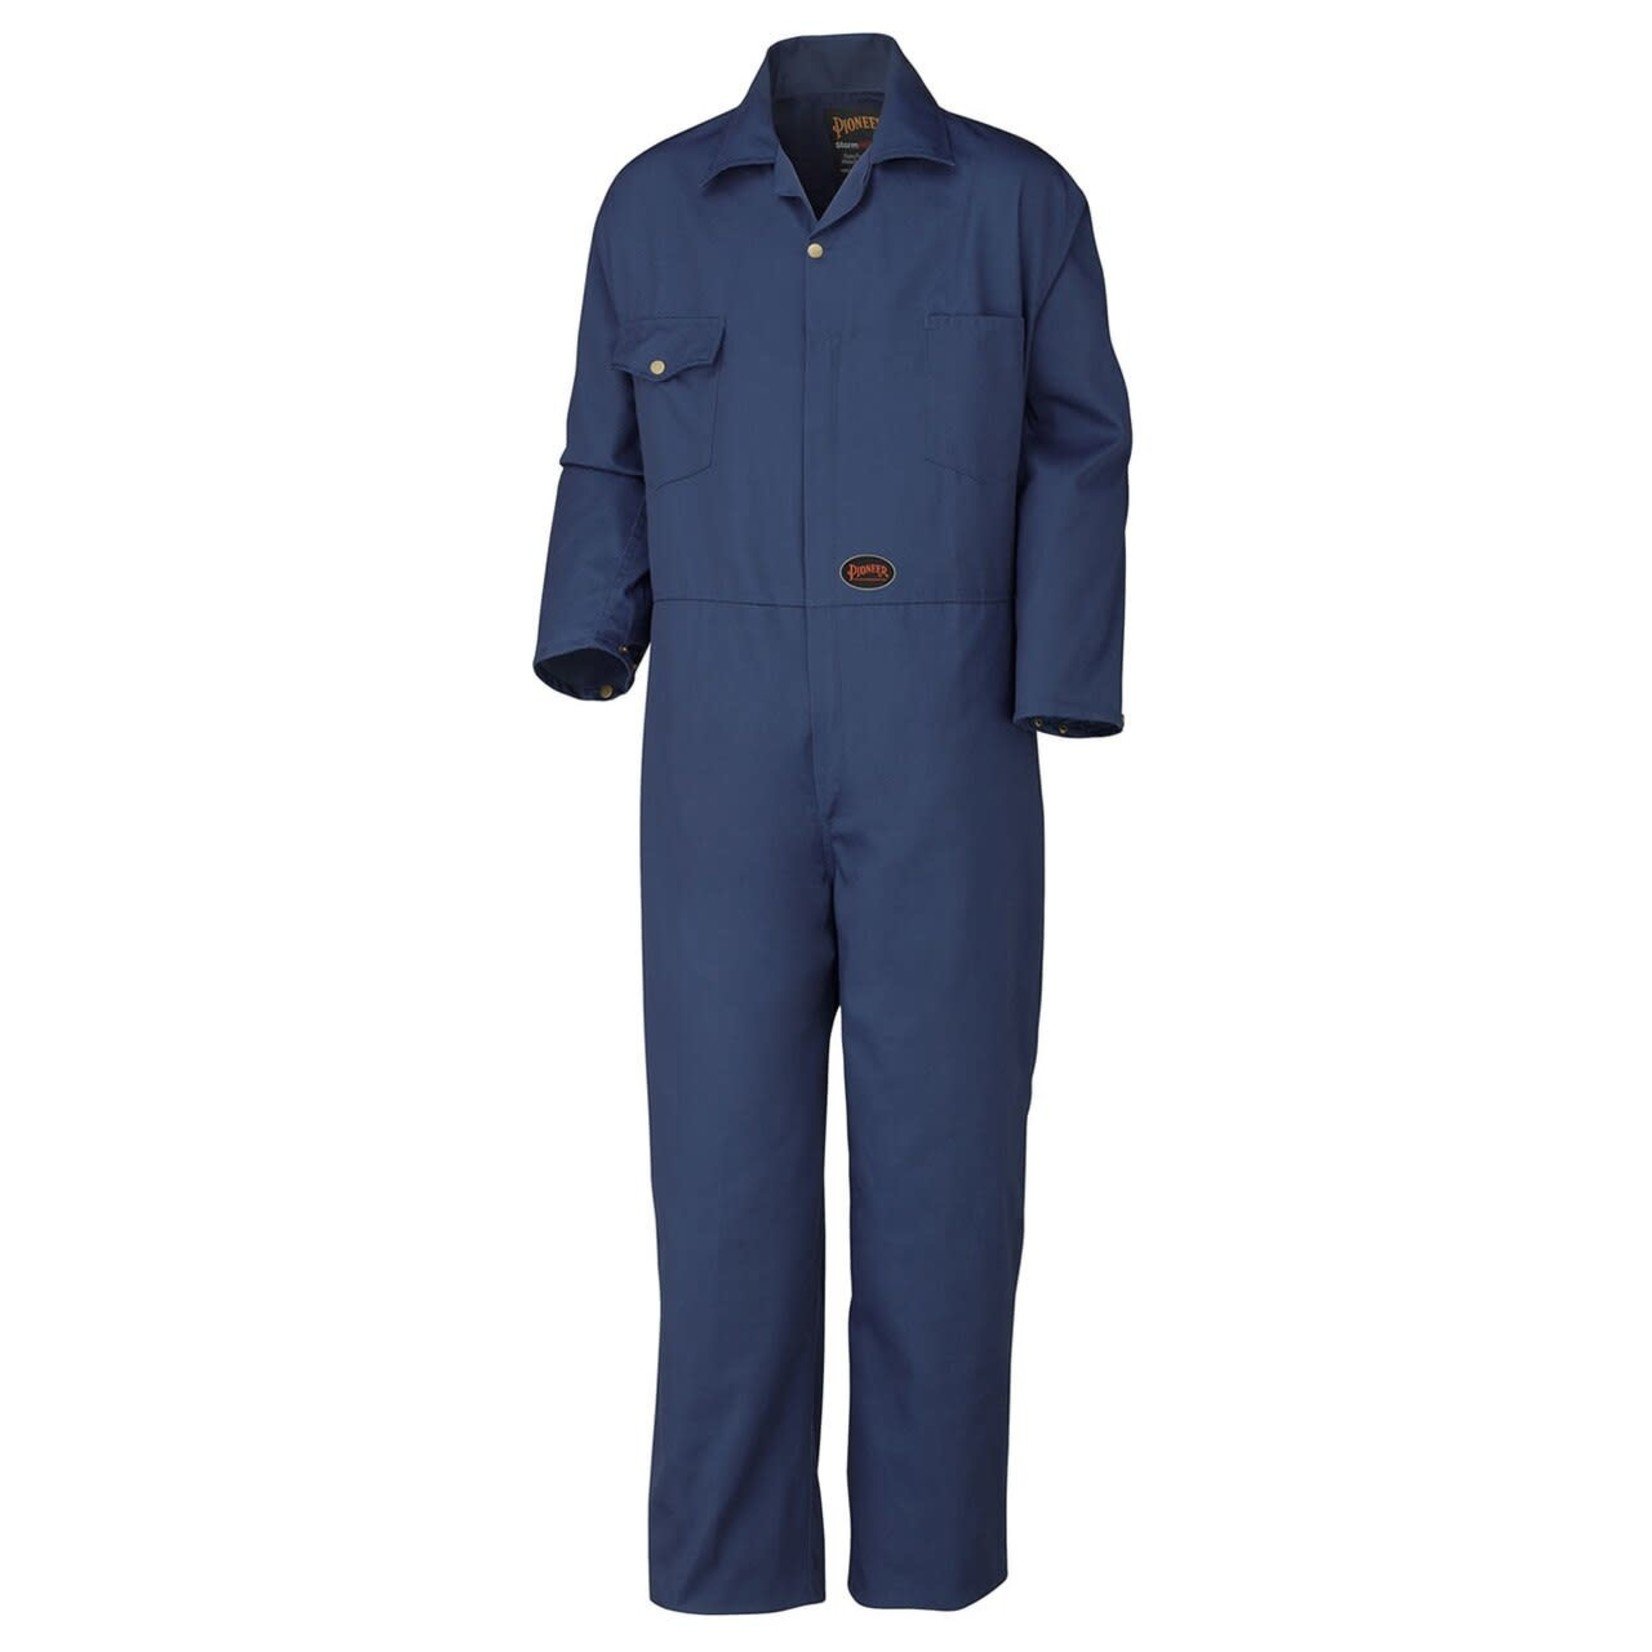 Pioneer Pioneer 515 / 515T Poly/Cotton Coverall Navy